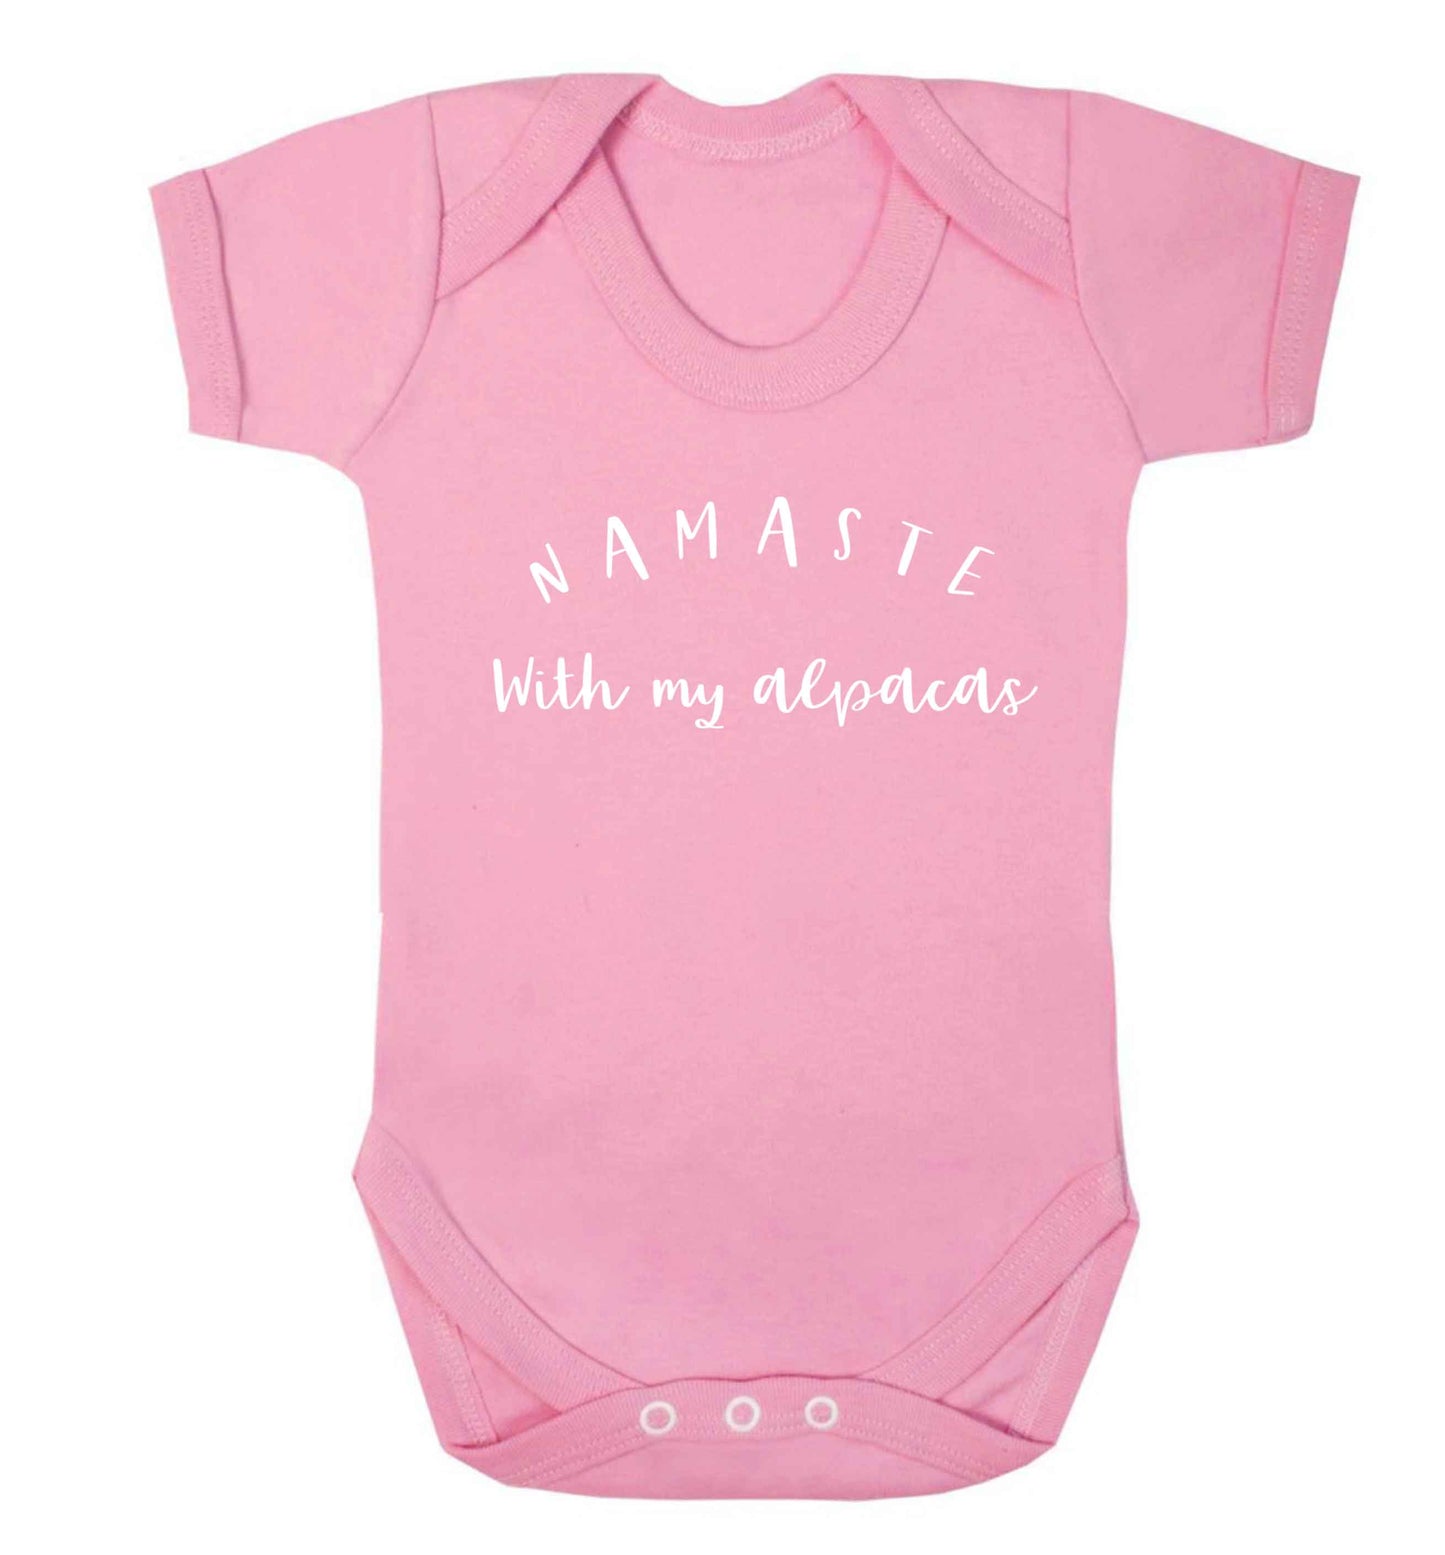 Namaste with my alpacas Baby Vest pale pink 18-24 months